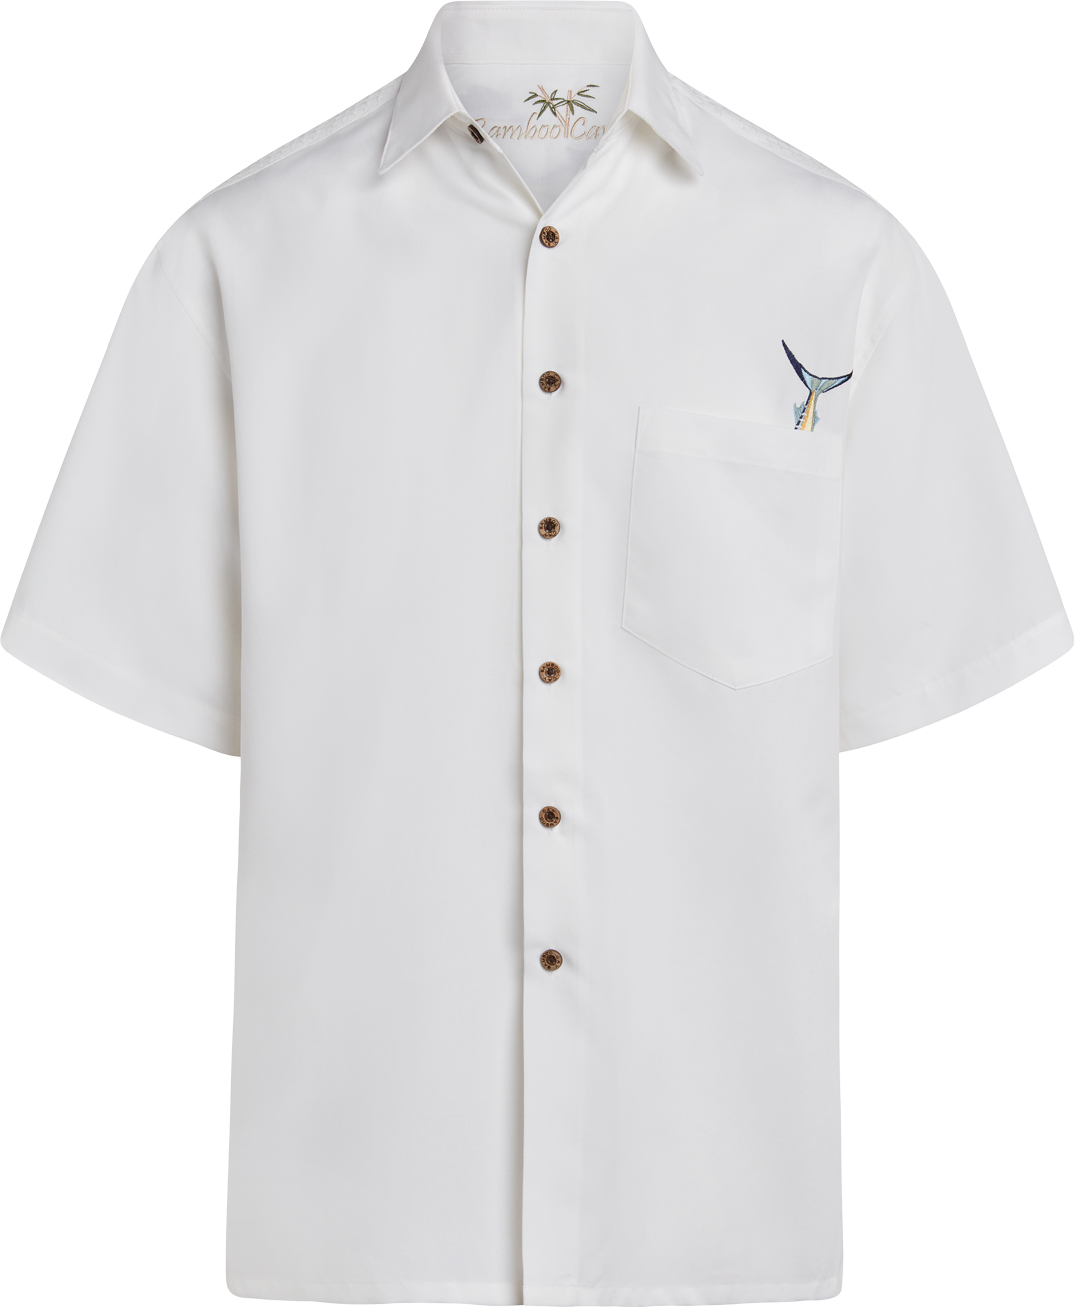 Bamboo Cay Men's Trapped Sailfish.Net Camp Shirt Off White